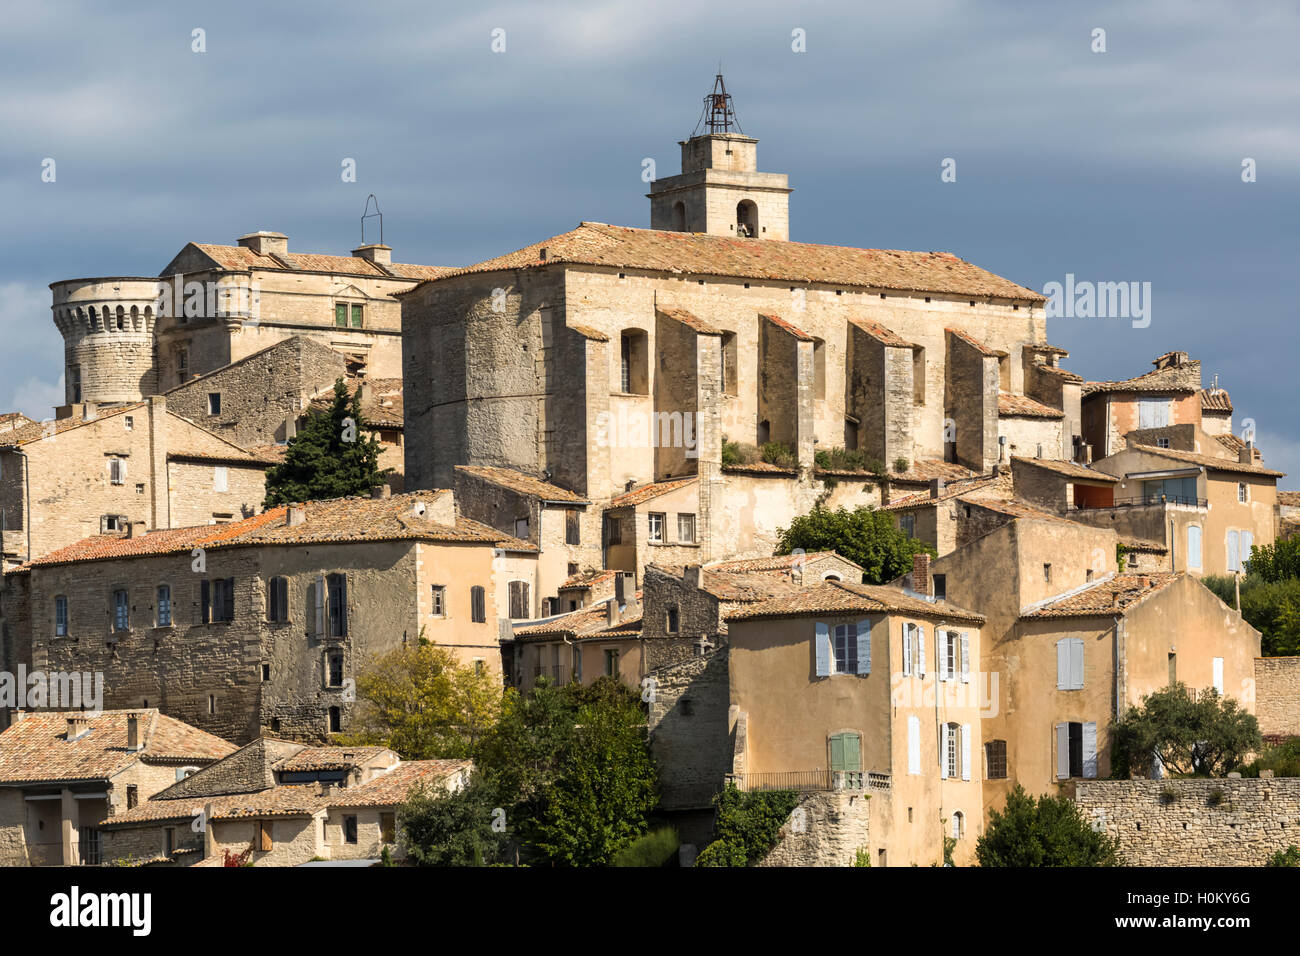 Medium view of hill town of Gordes, Luberon, Provence, France Stock Photo